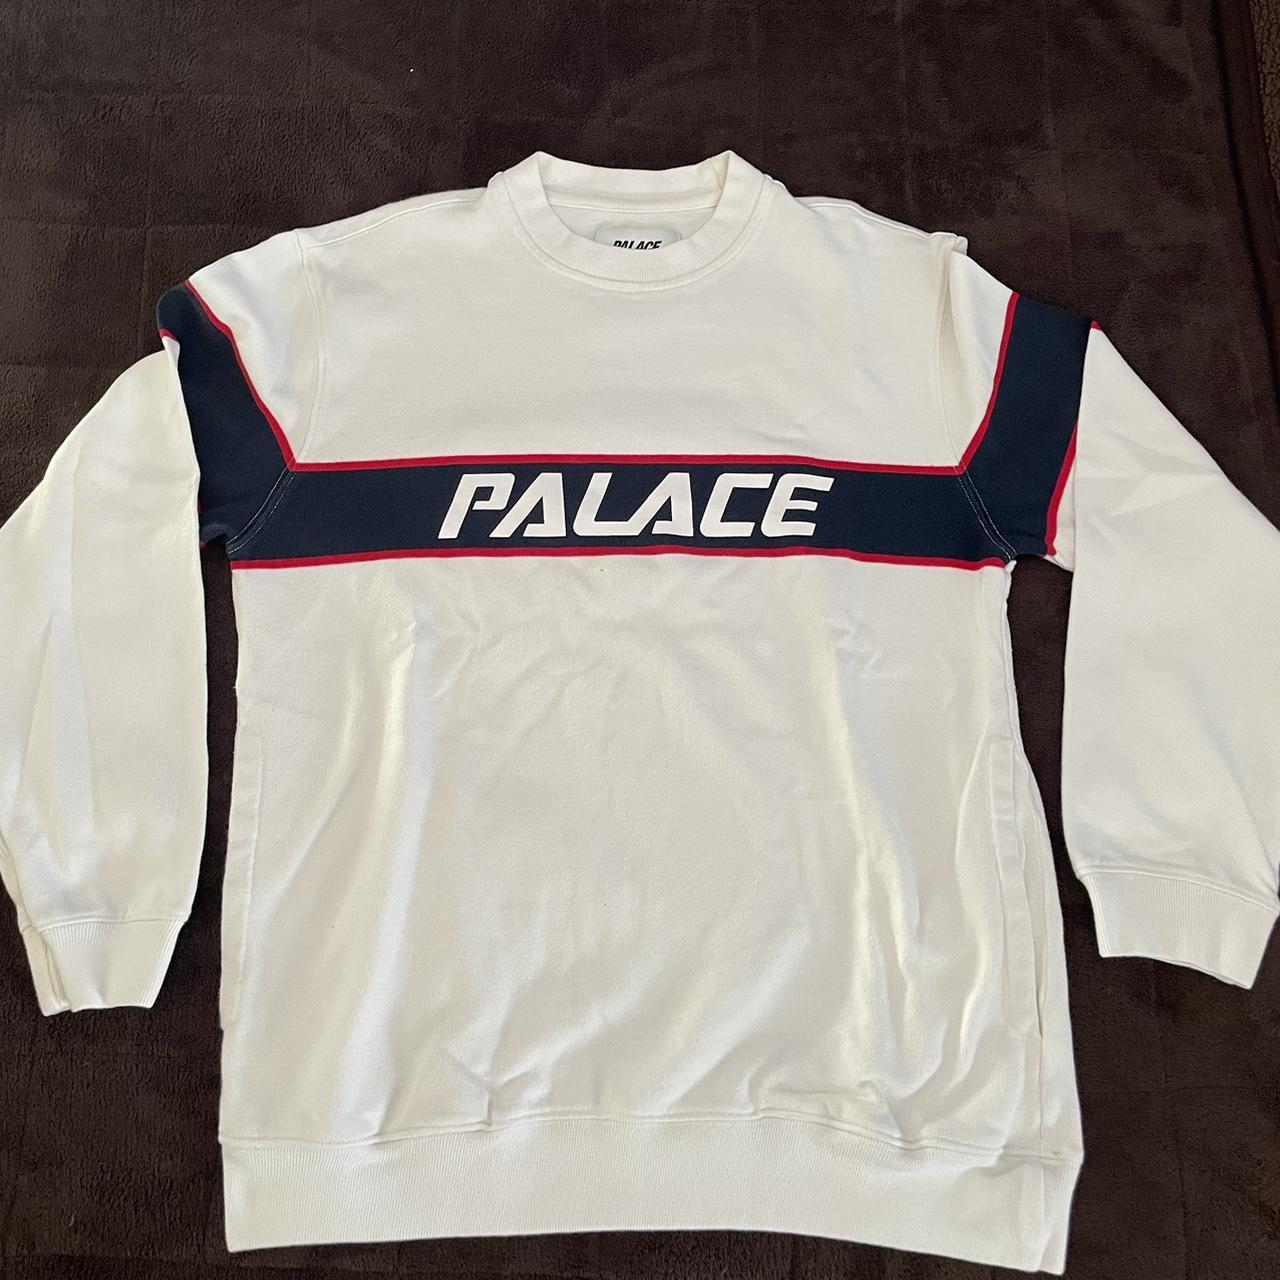 Palace Men's White and Red Sweatshirt